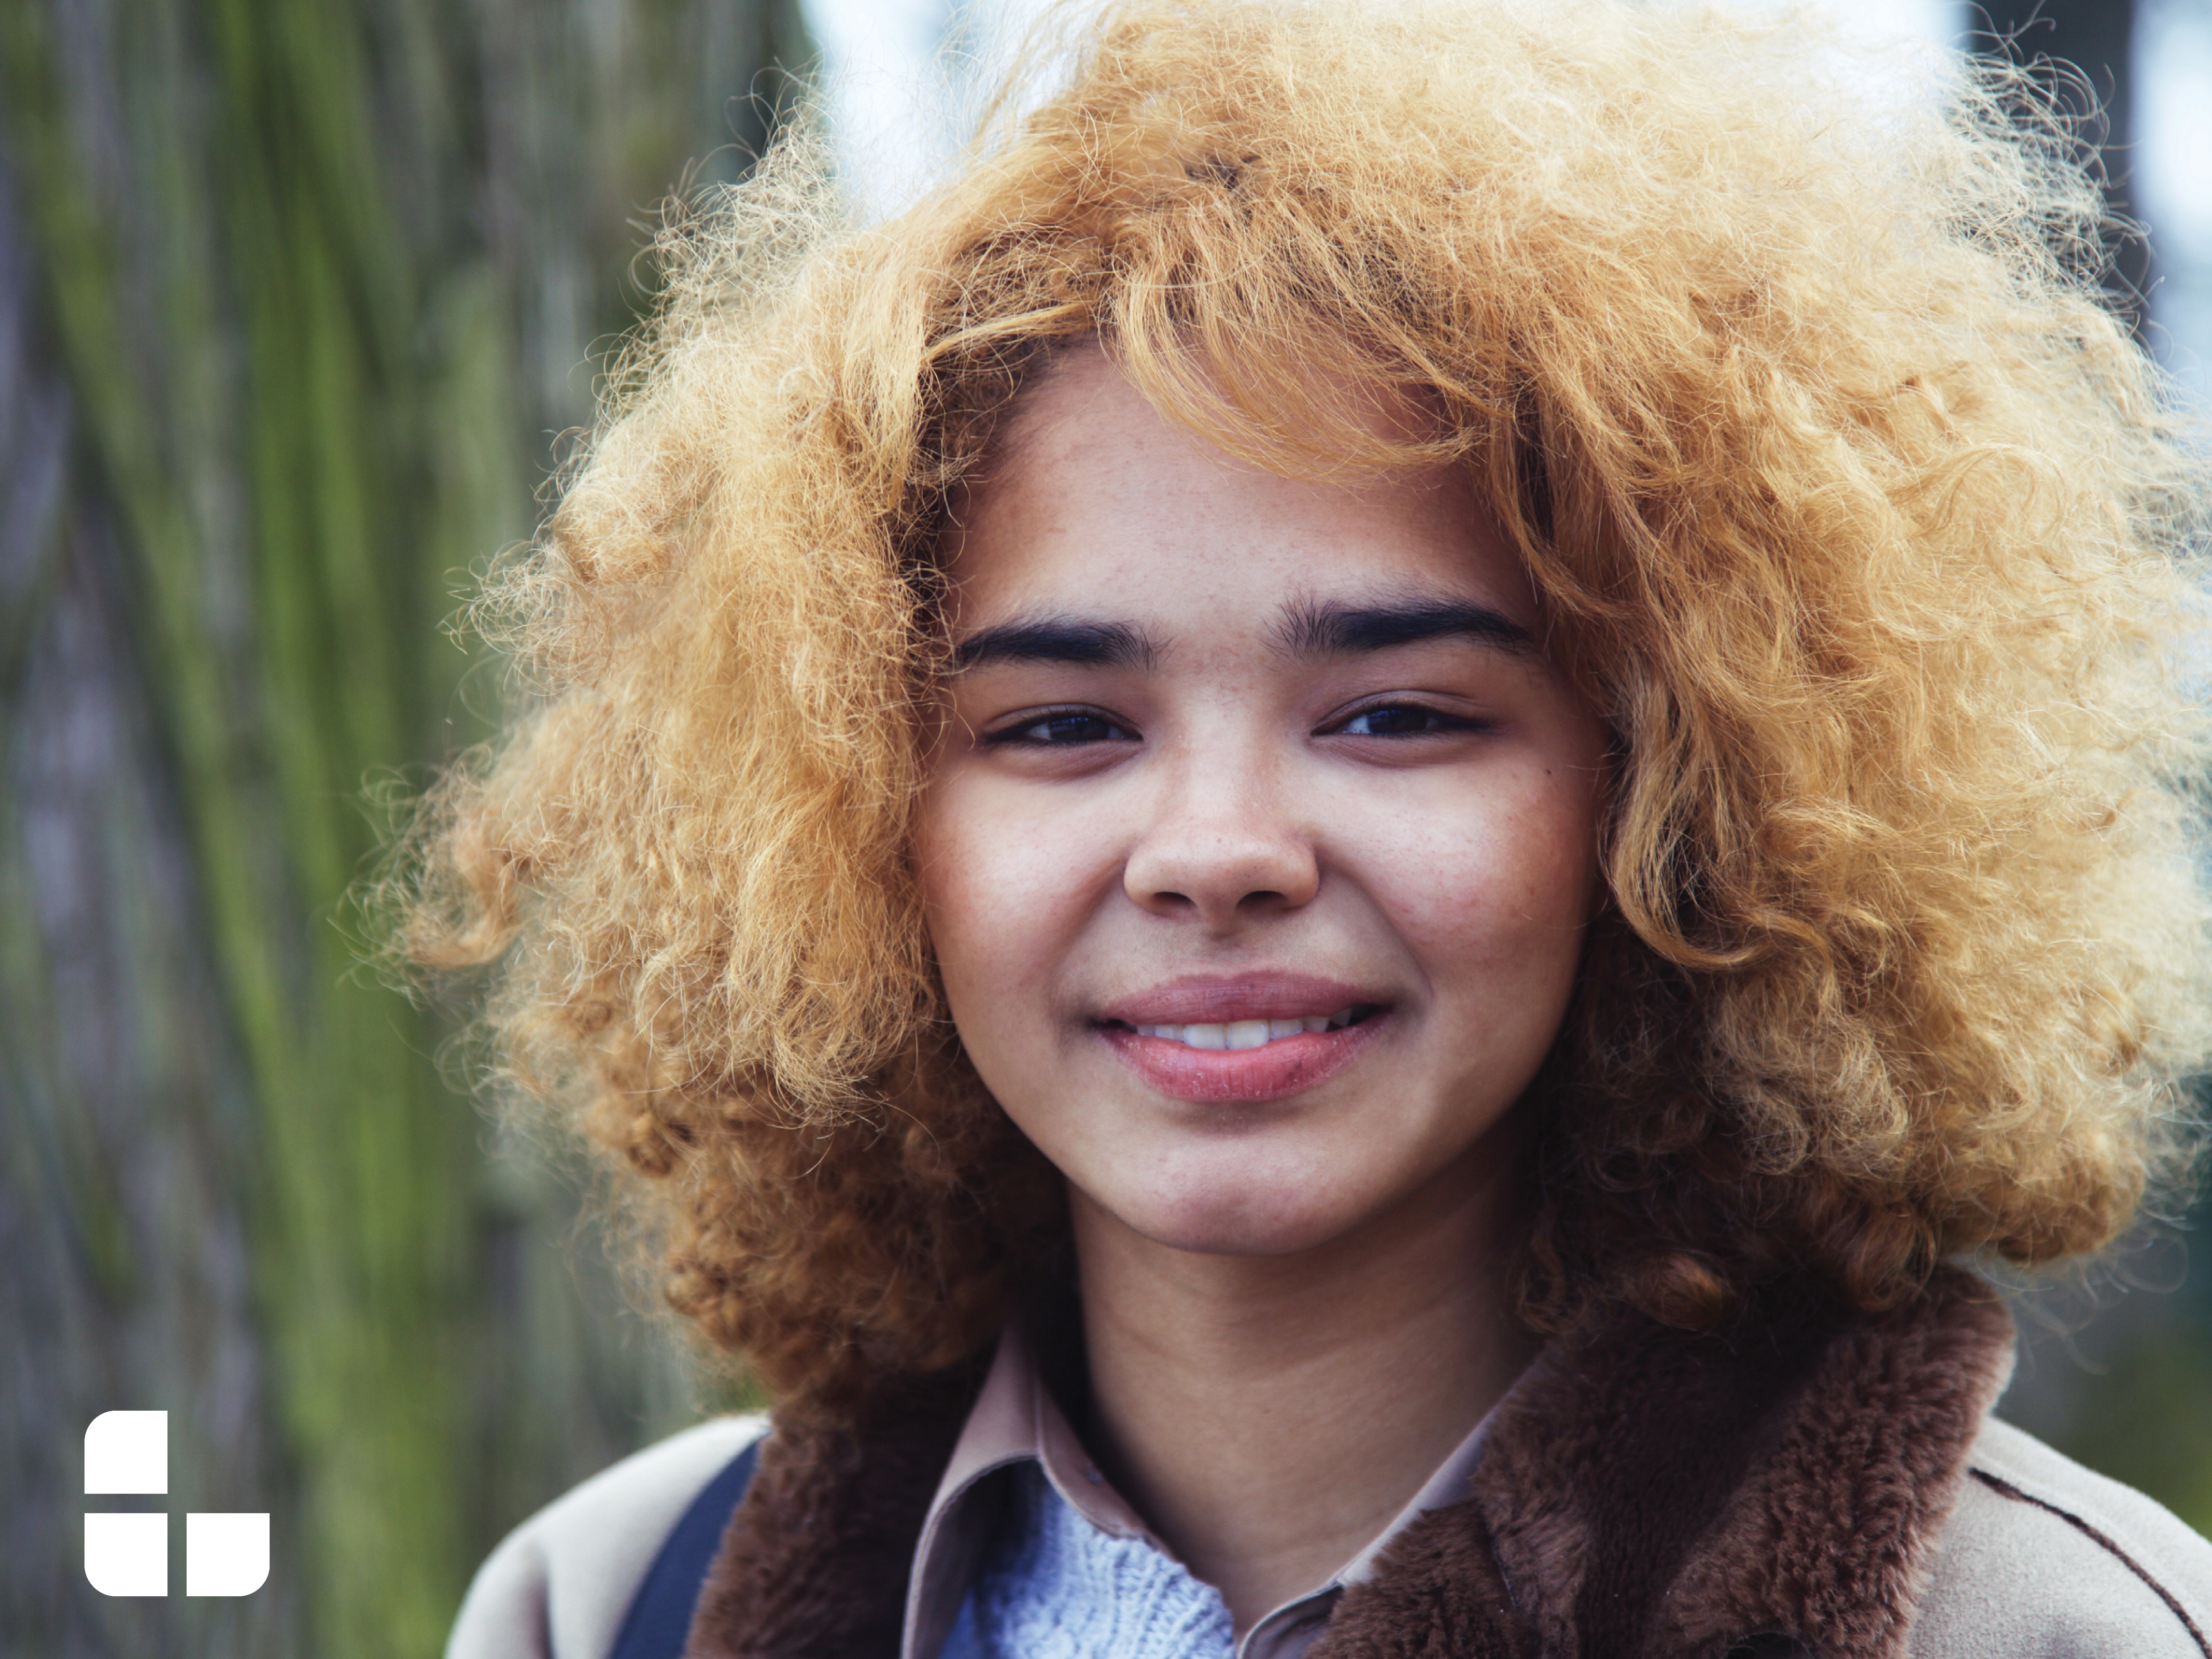 A picture of a girl with very curly blond hair and a beige jacket.